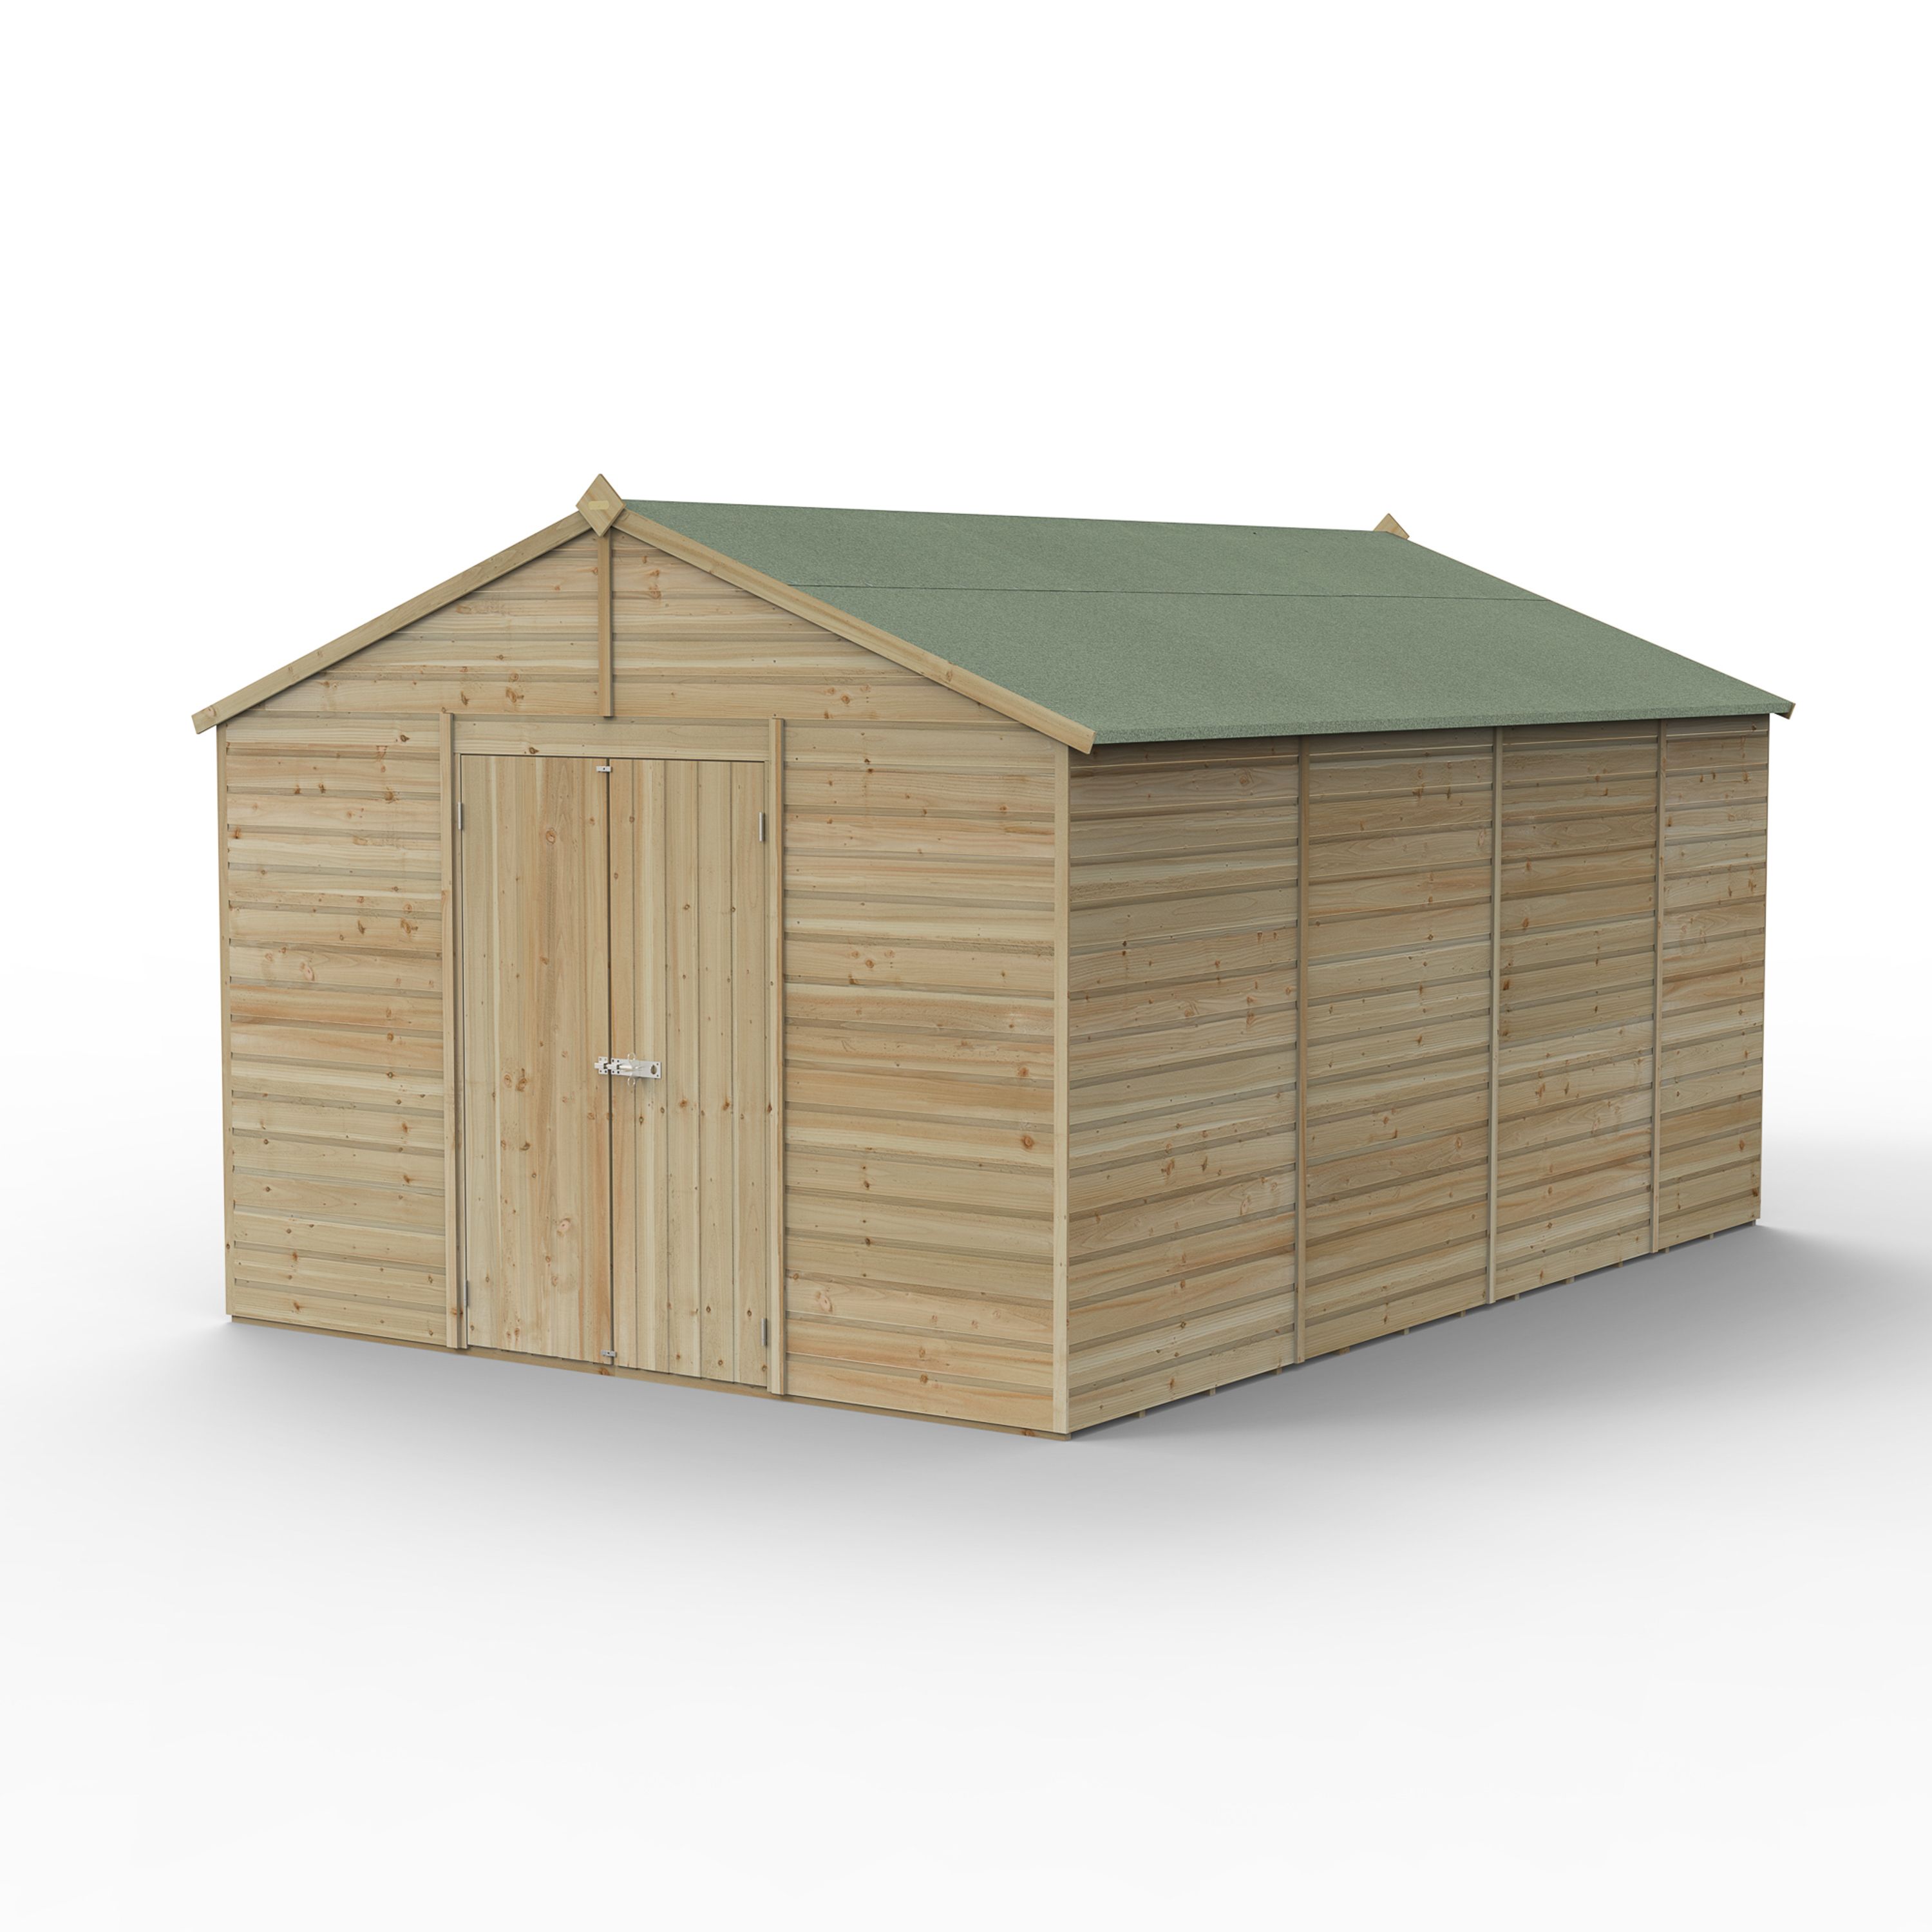 Forest Garden Beckwood 10x15 ft Apex Natural timber Wooden 2 door Shed with floor (Base included)